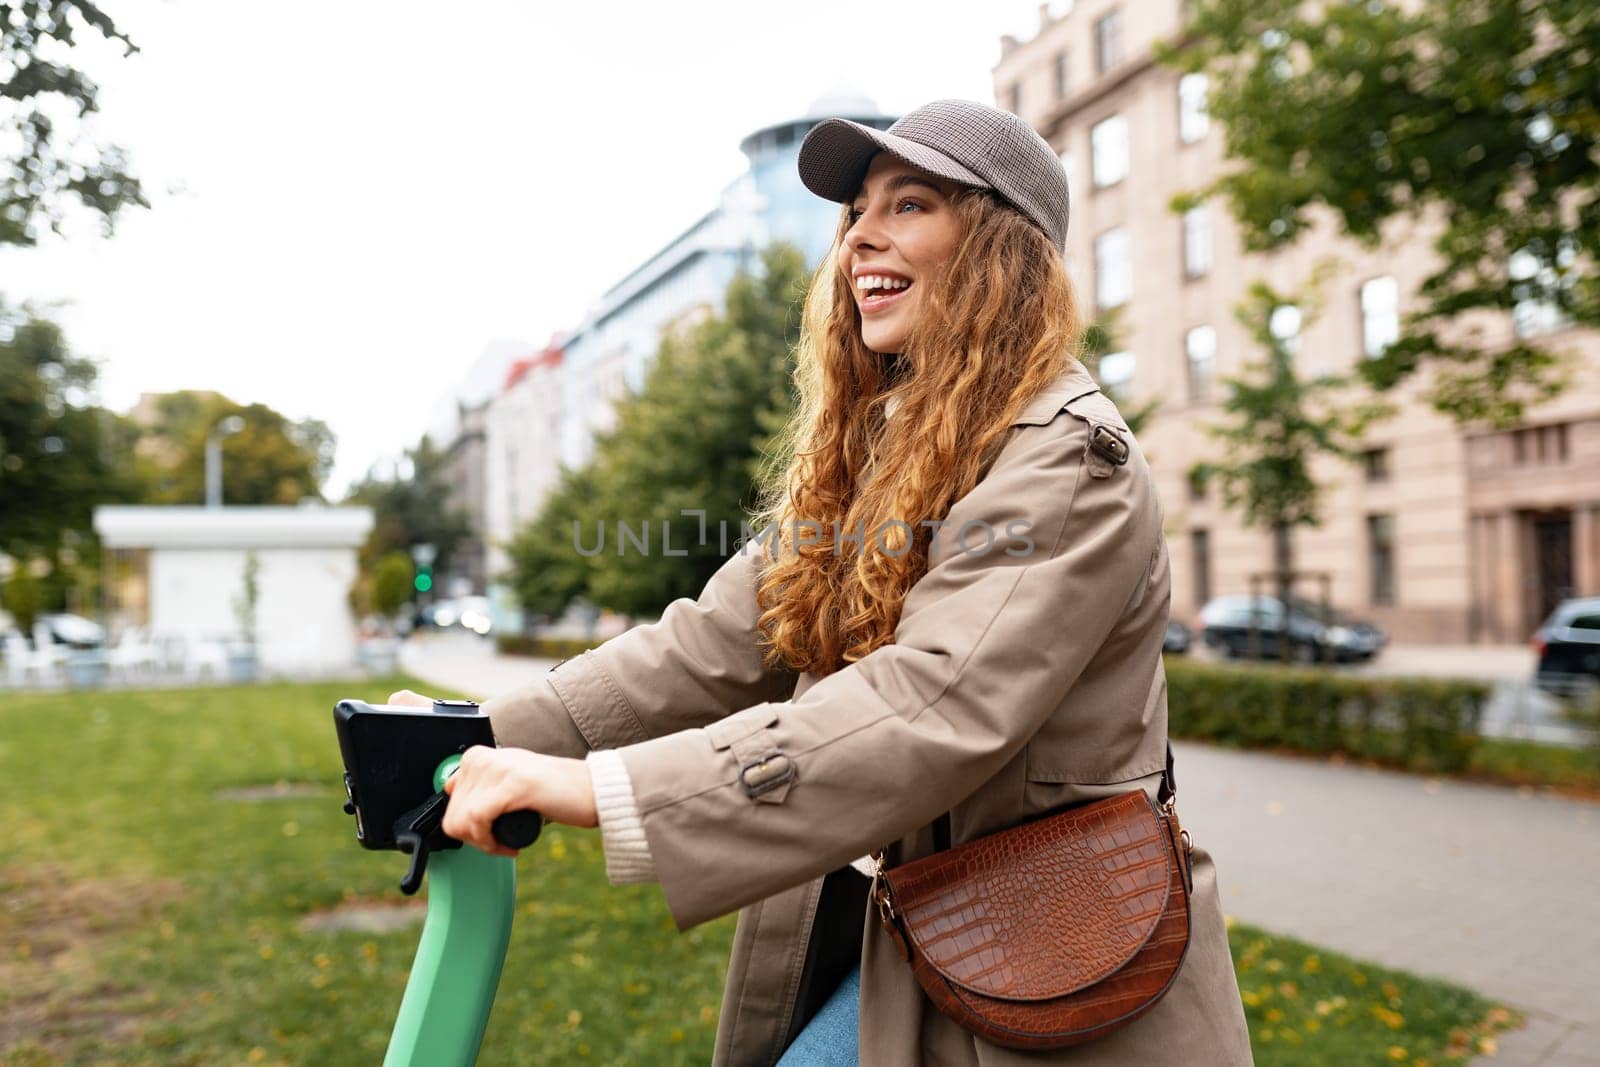 Young woman standing on electric scooter in the city, close up